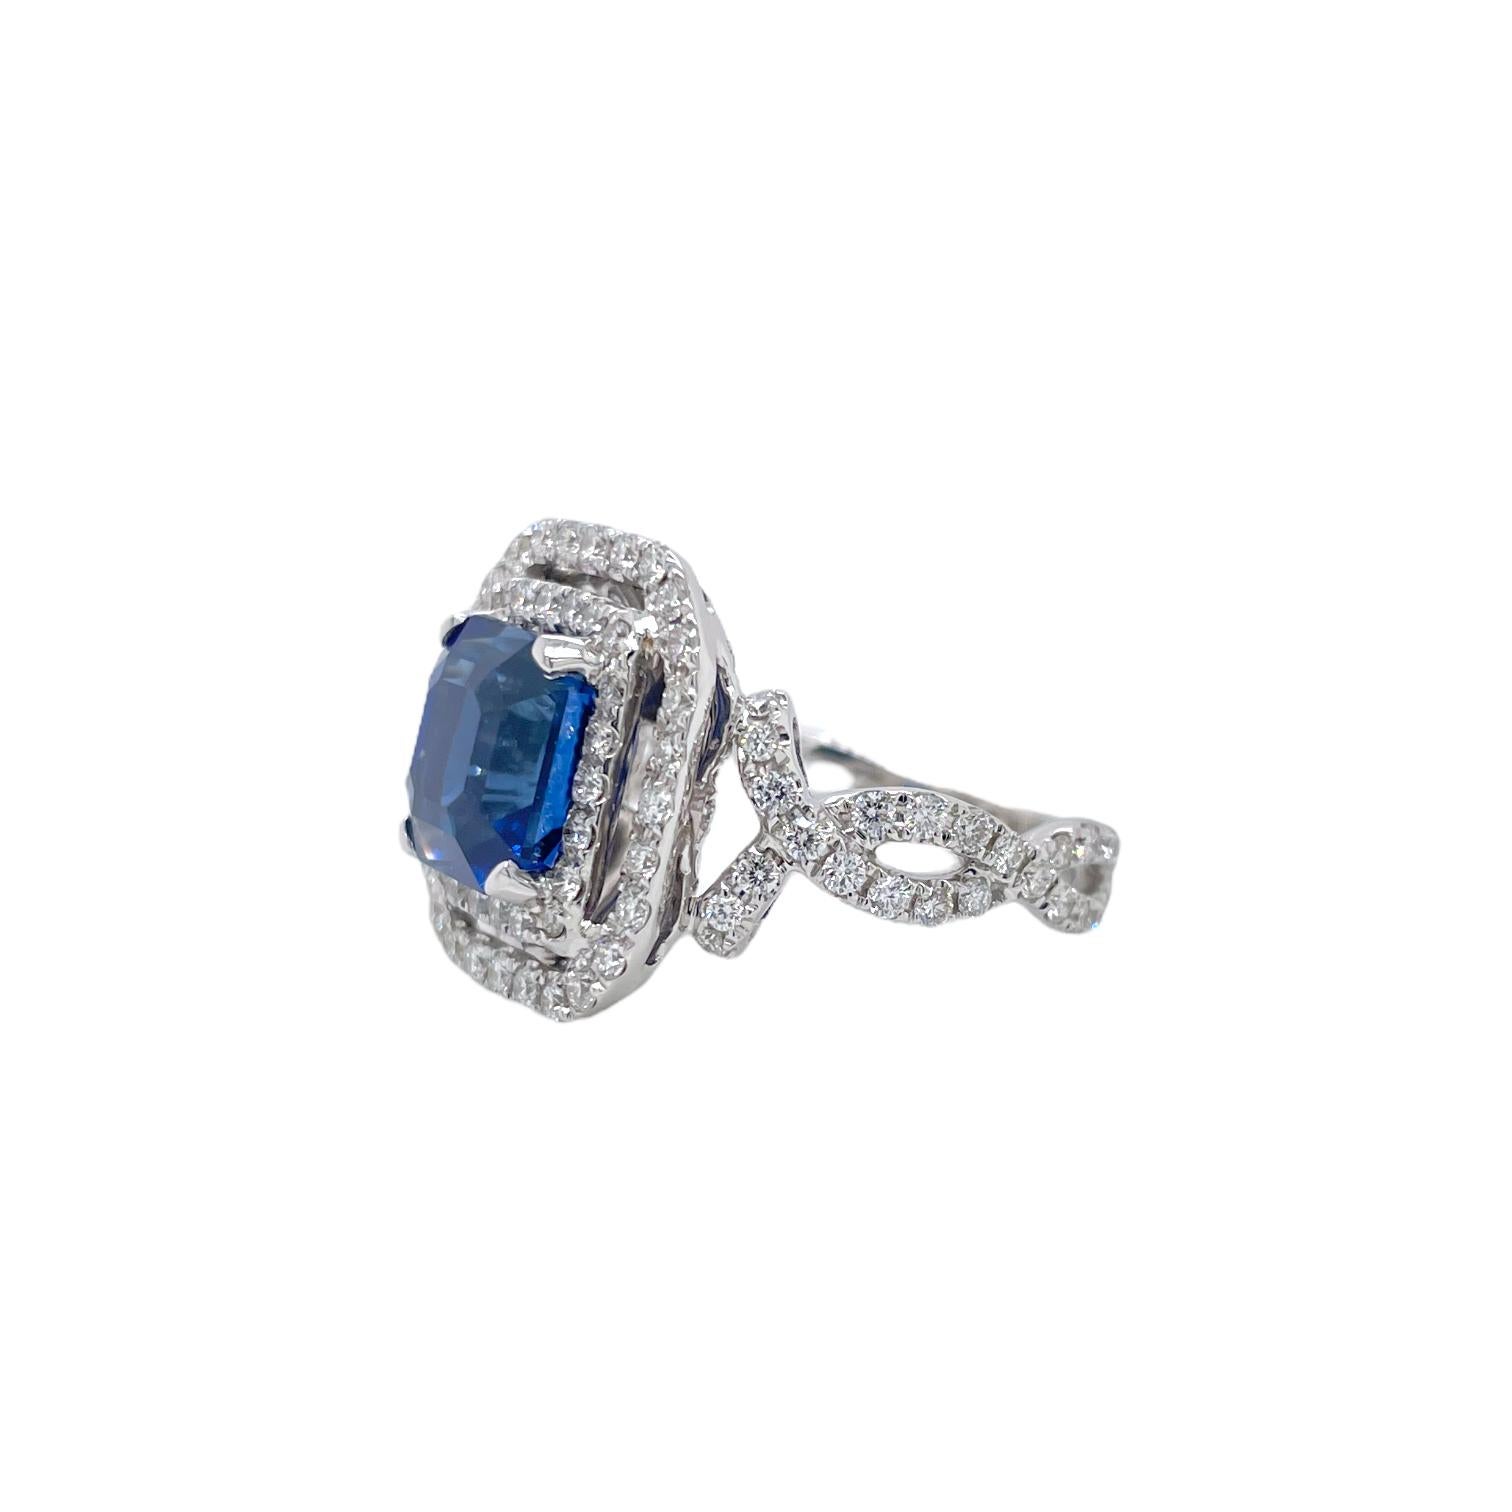 Ring contains one GIA certified octagonal shape sapphire 4.60ct and round brilliant diamonds within halo and infinity mounting 1.58tcw. Sapphire and diamonds are mounted in a handmade basket prong setting. Sapphire originates from Madagascar.